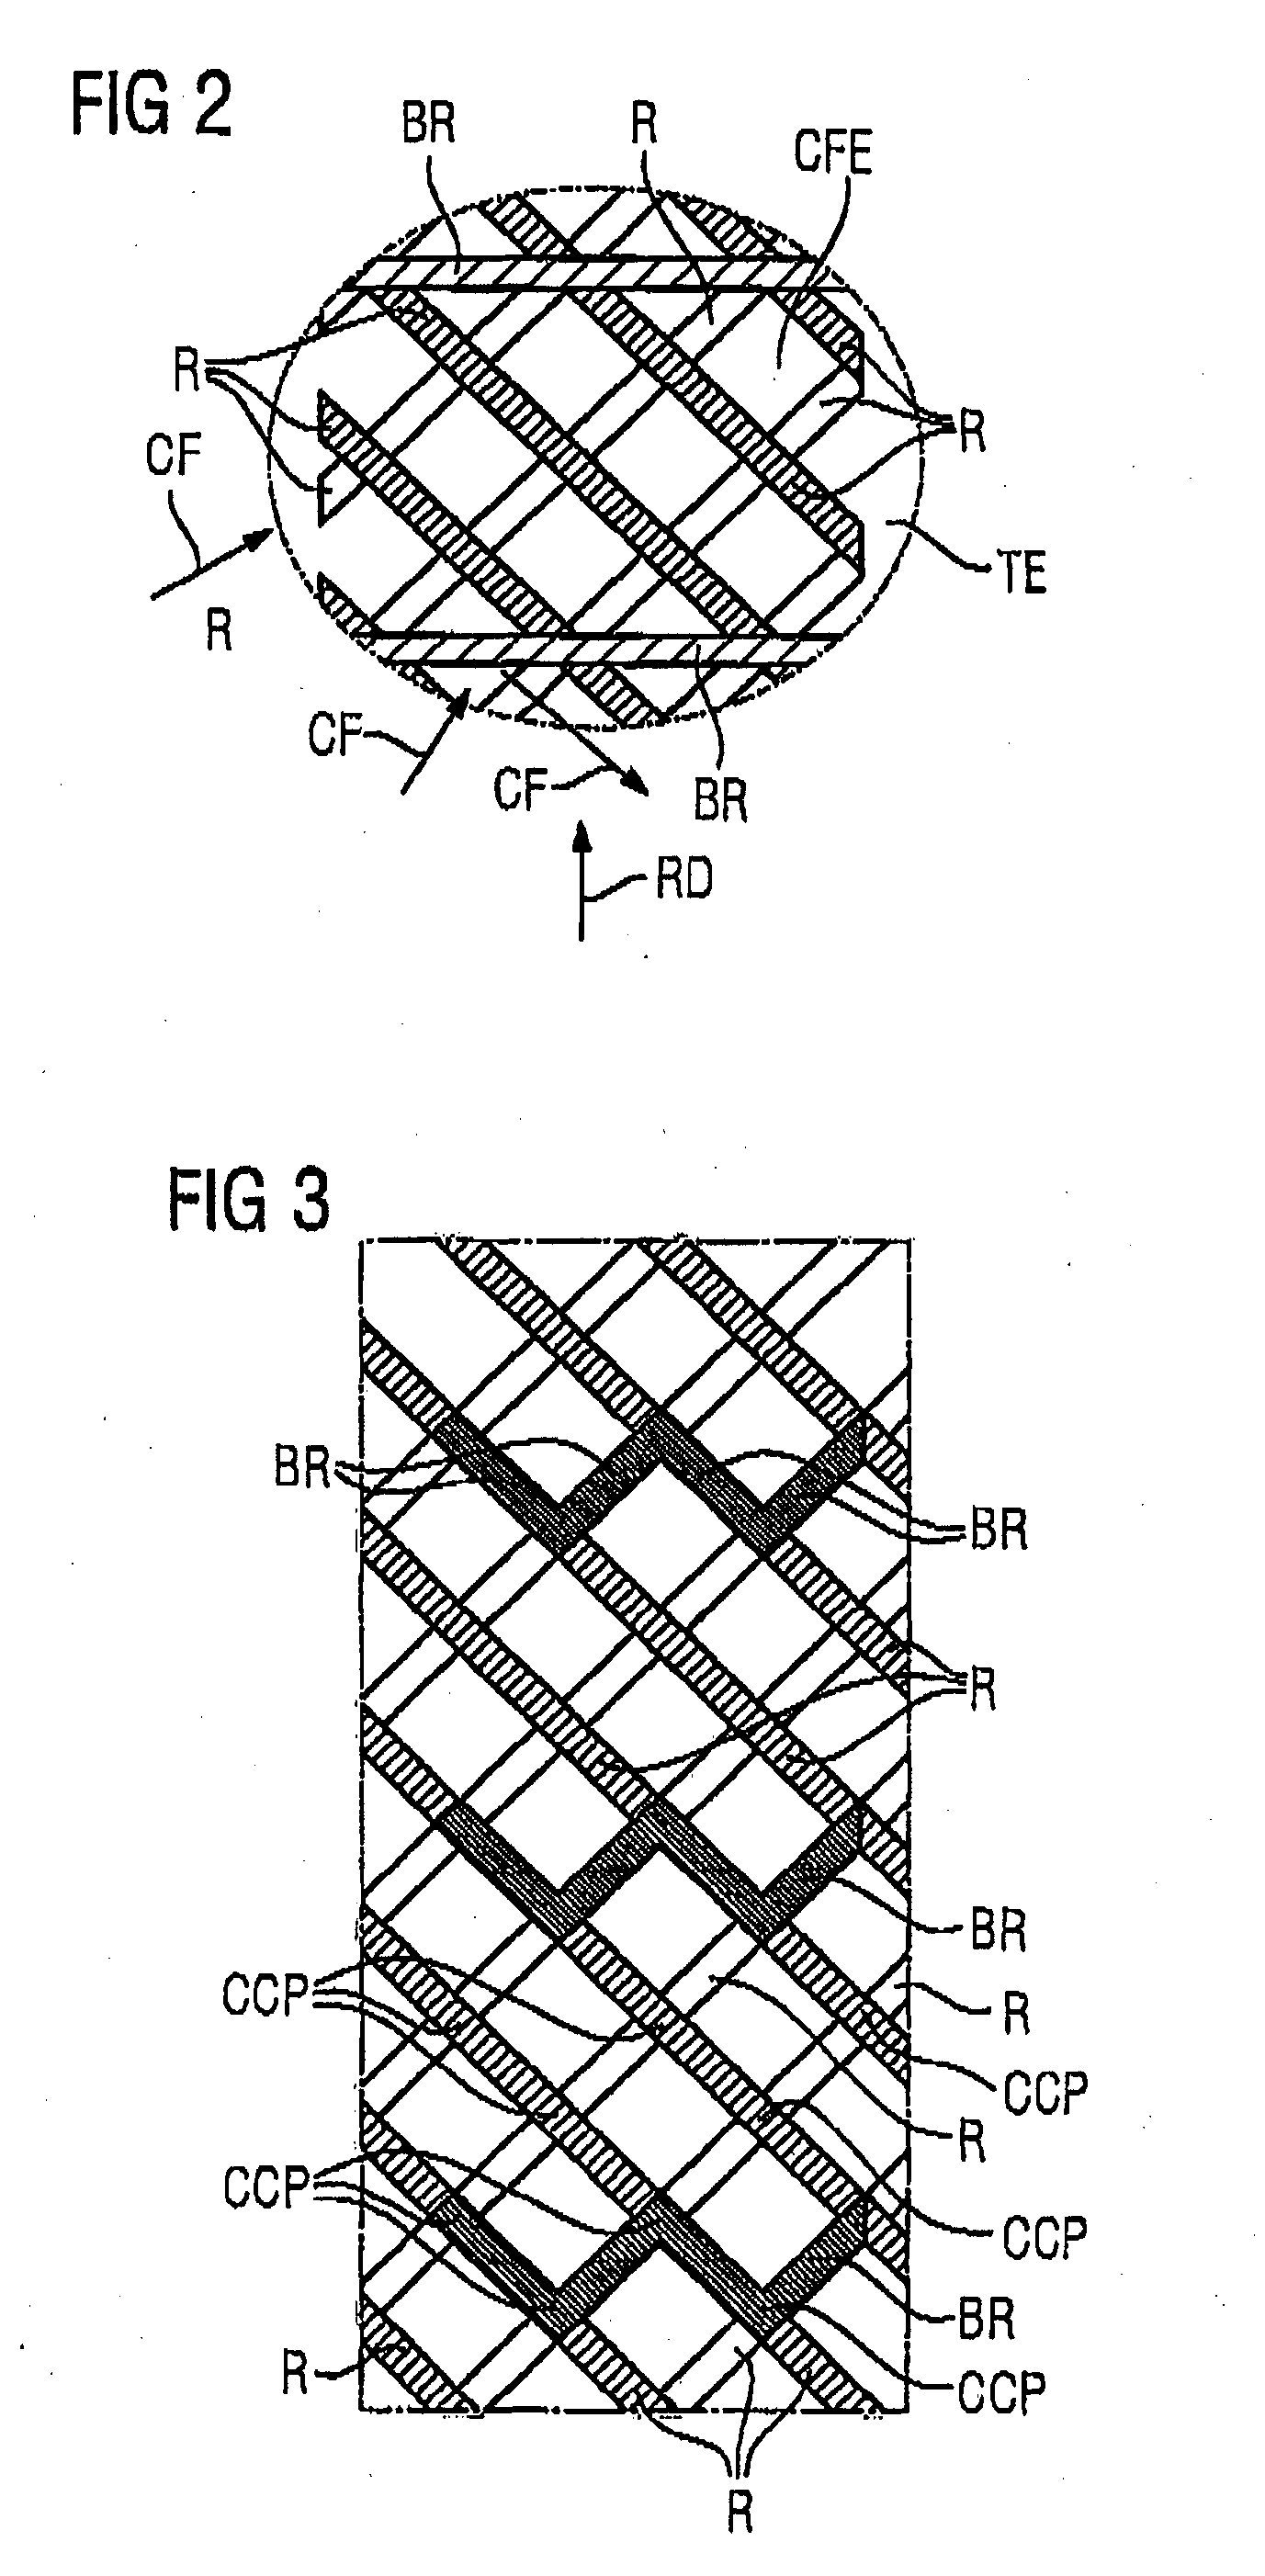 Airfoil with cooling passages